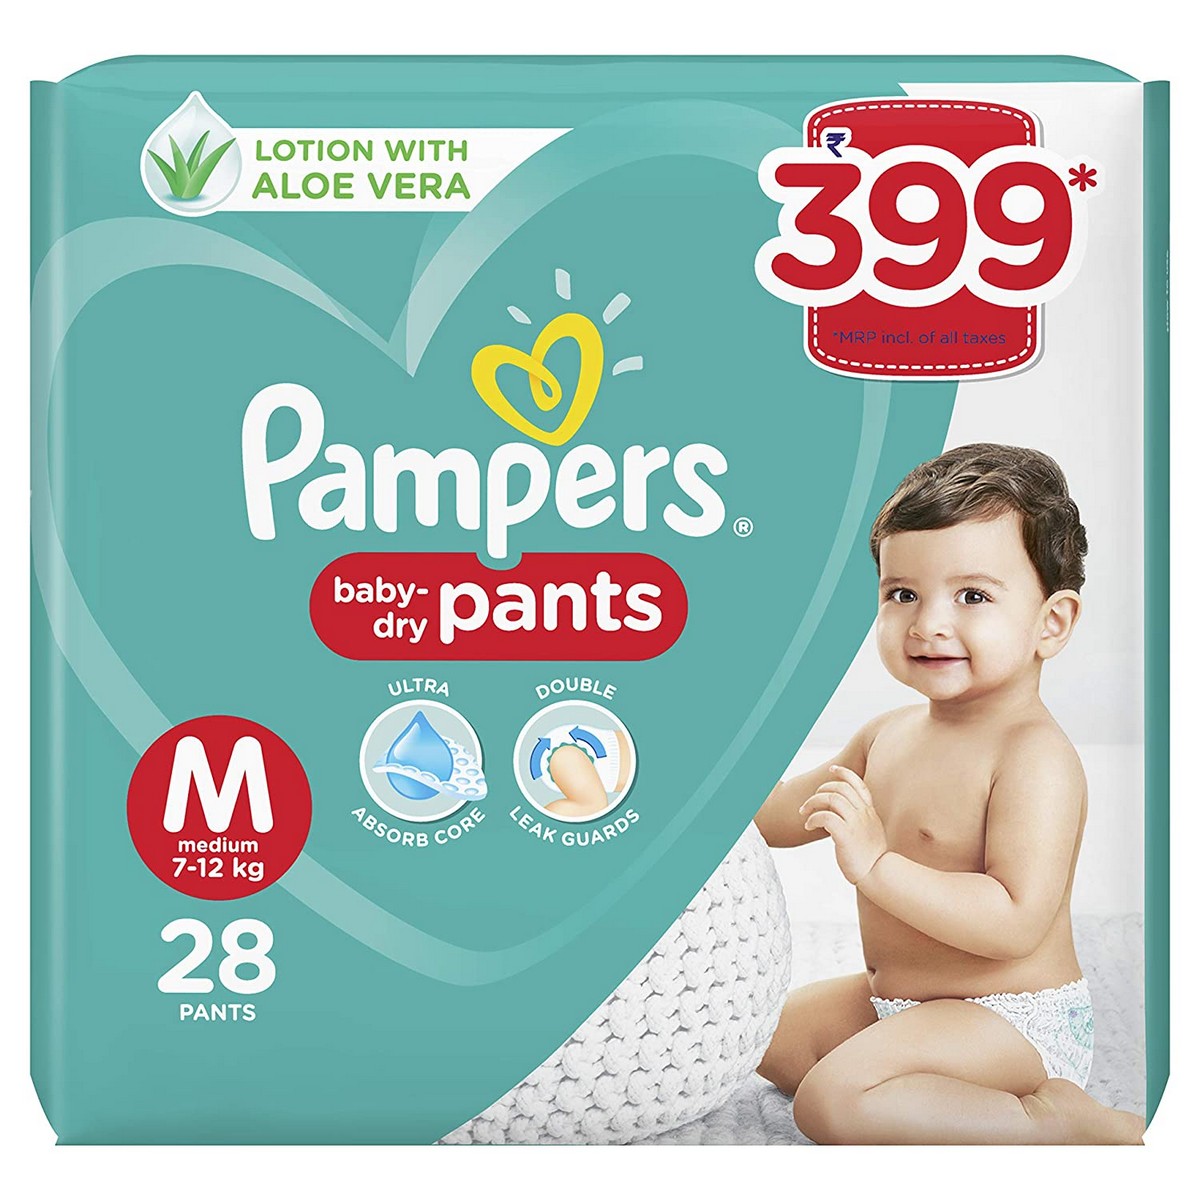 https://richesm.com/wp-content/uploads/2022/07/Pampers-All-round-Protection-Pants-Medium-Size-Baby-Diapers-28-Count.jpg